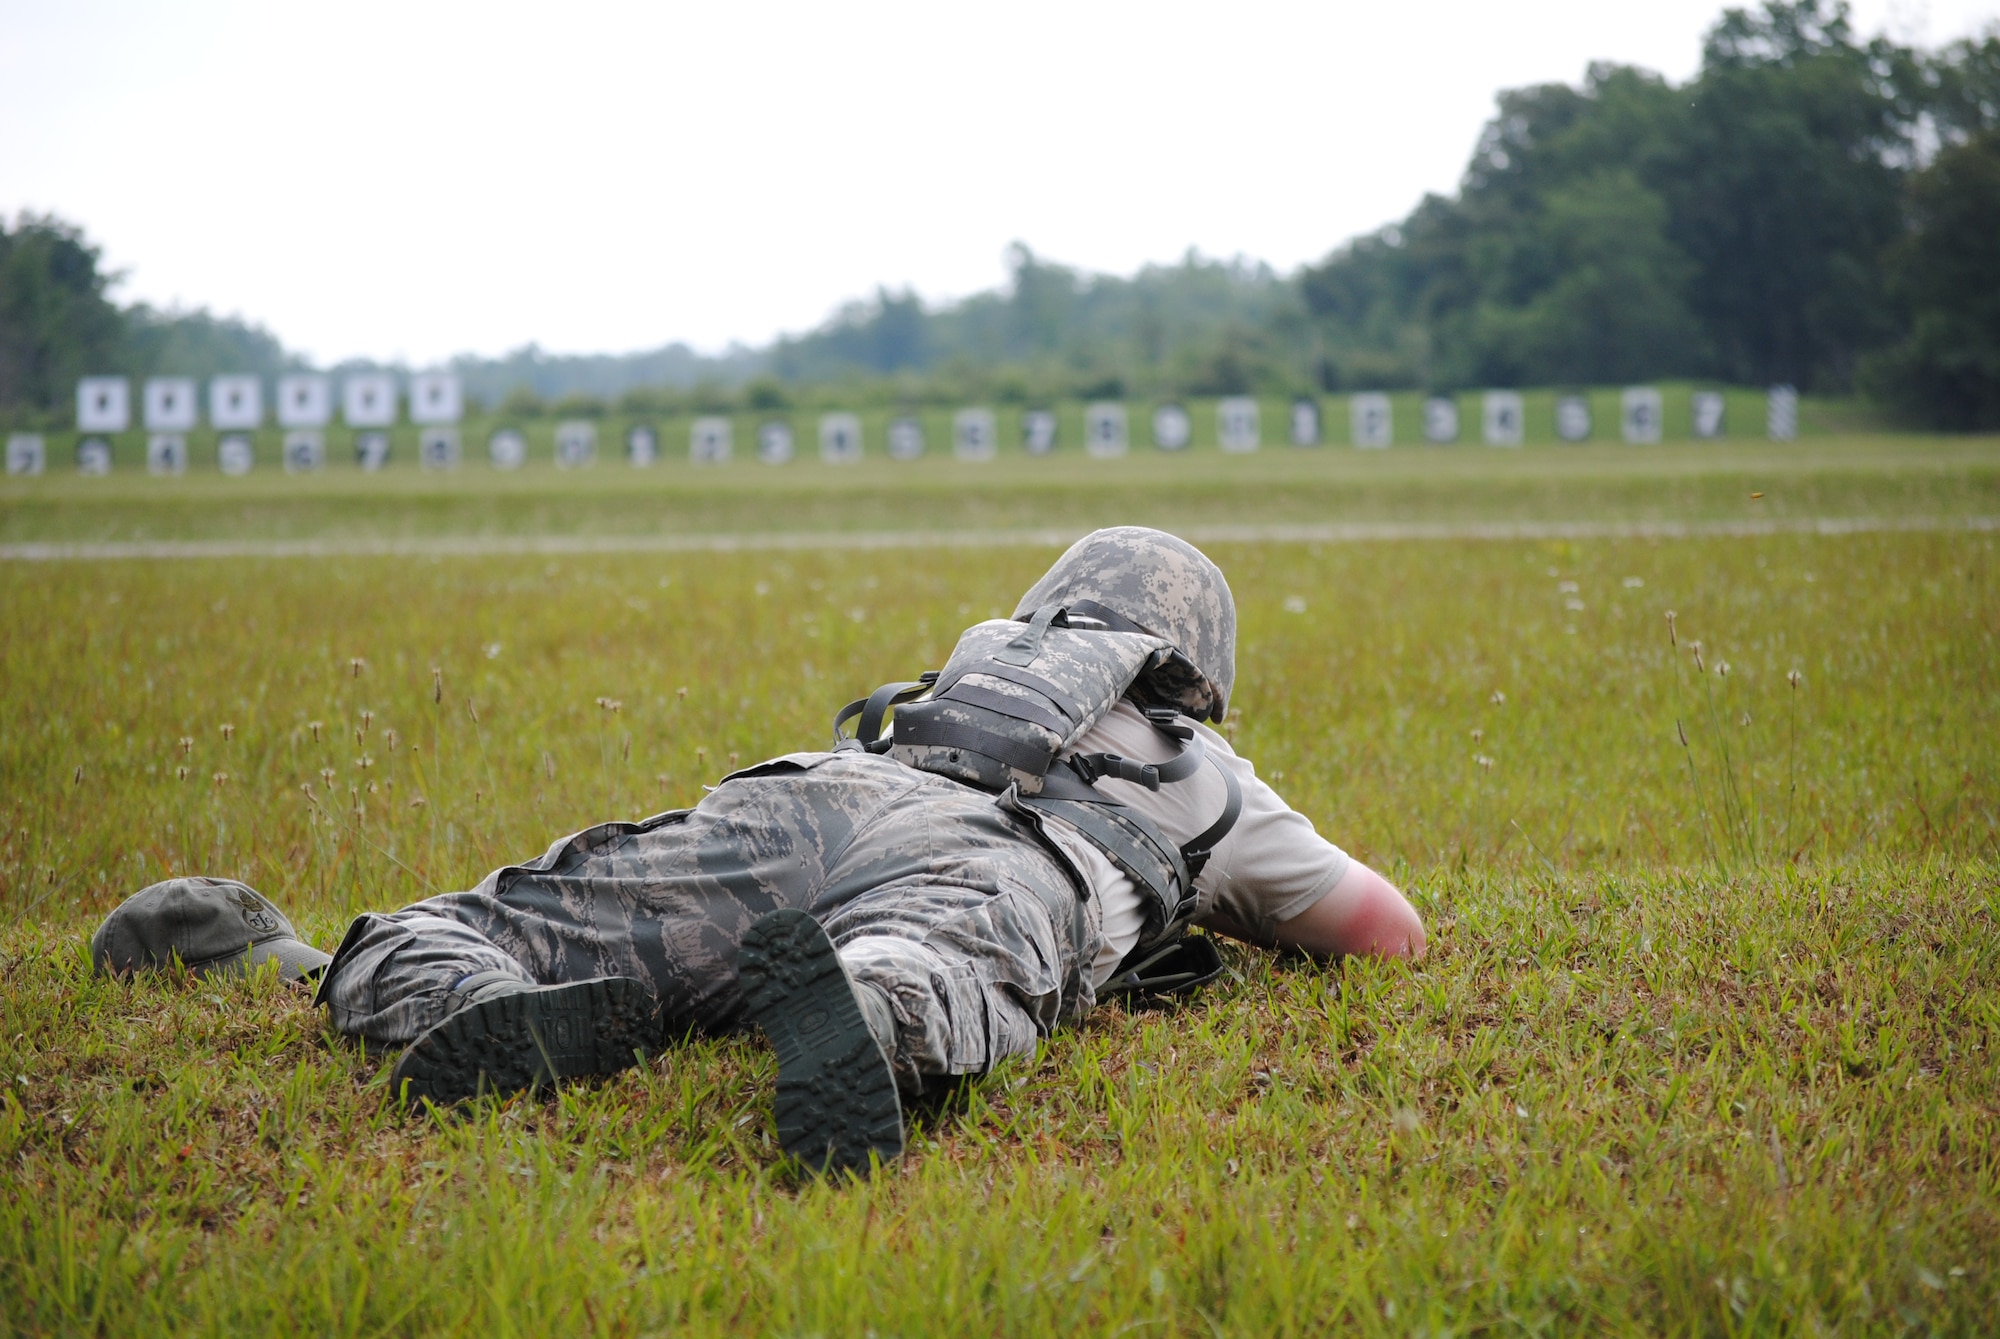 Technical Sergeant Rice of the 164AW fires from a prone position at targets 400 yards away during 2010 Tennessee Air NAtional Guard shooting competition.